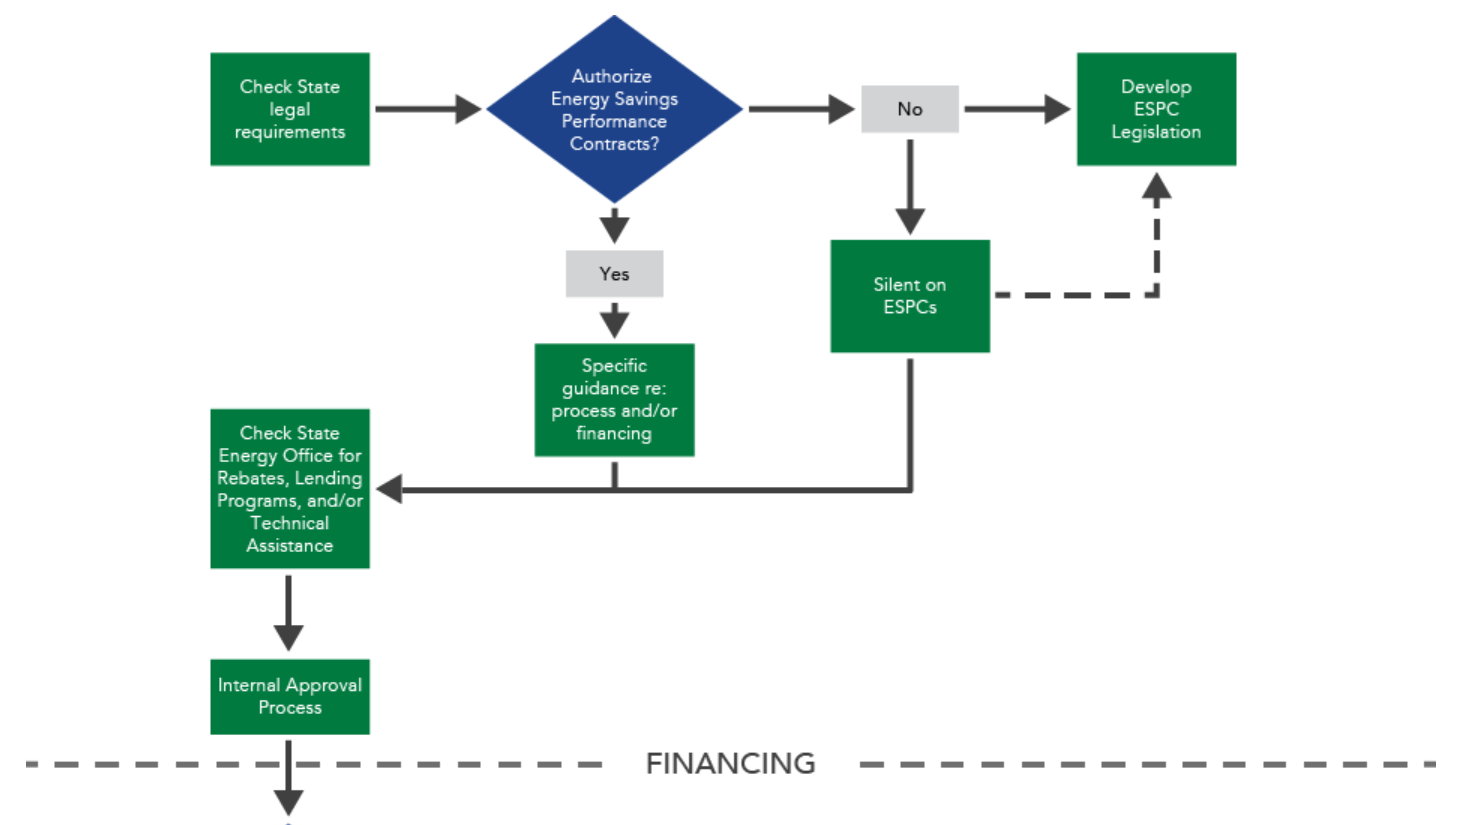 Decision tree for financing options